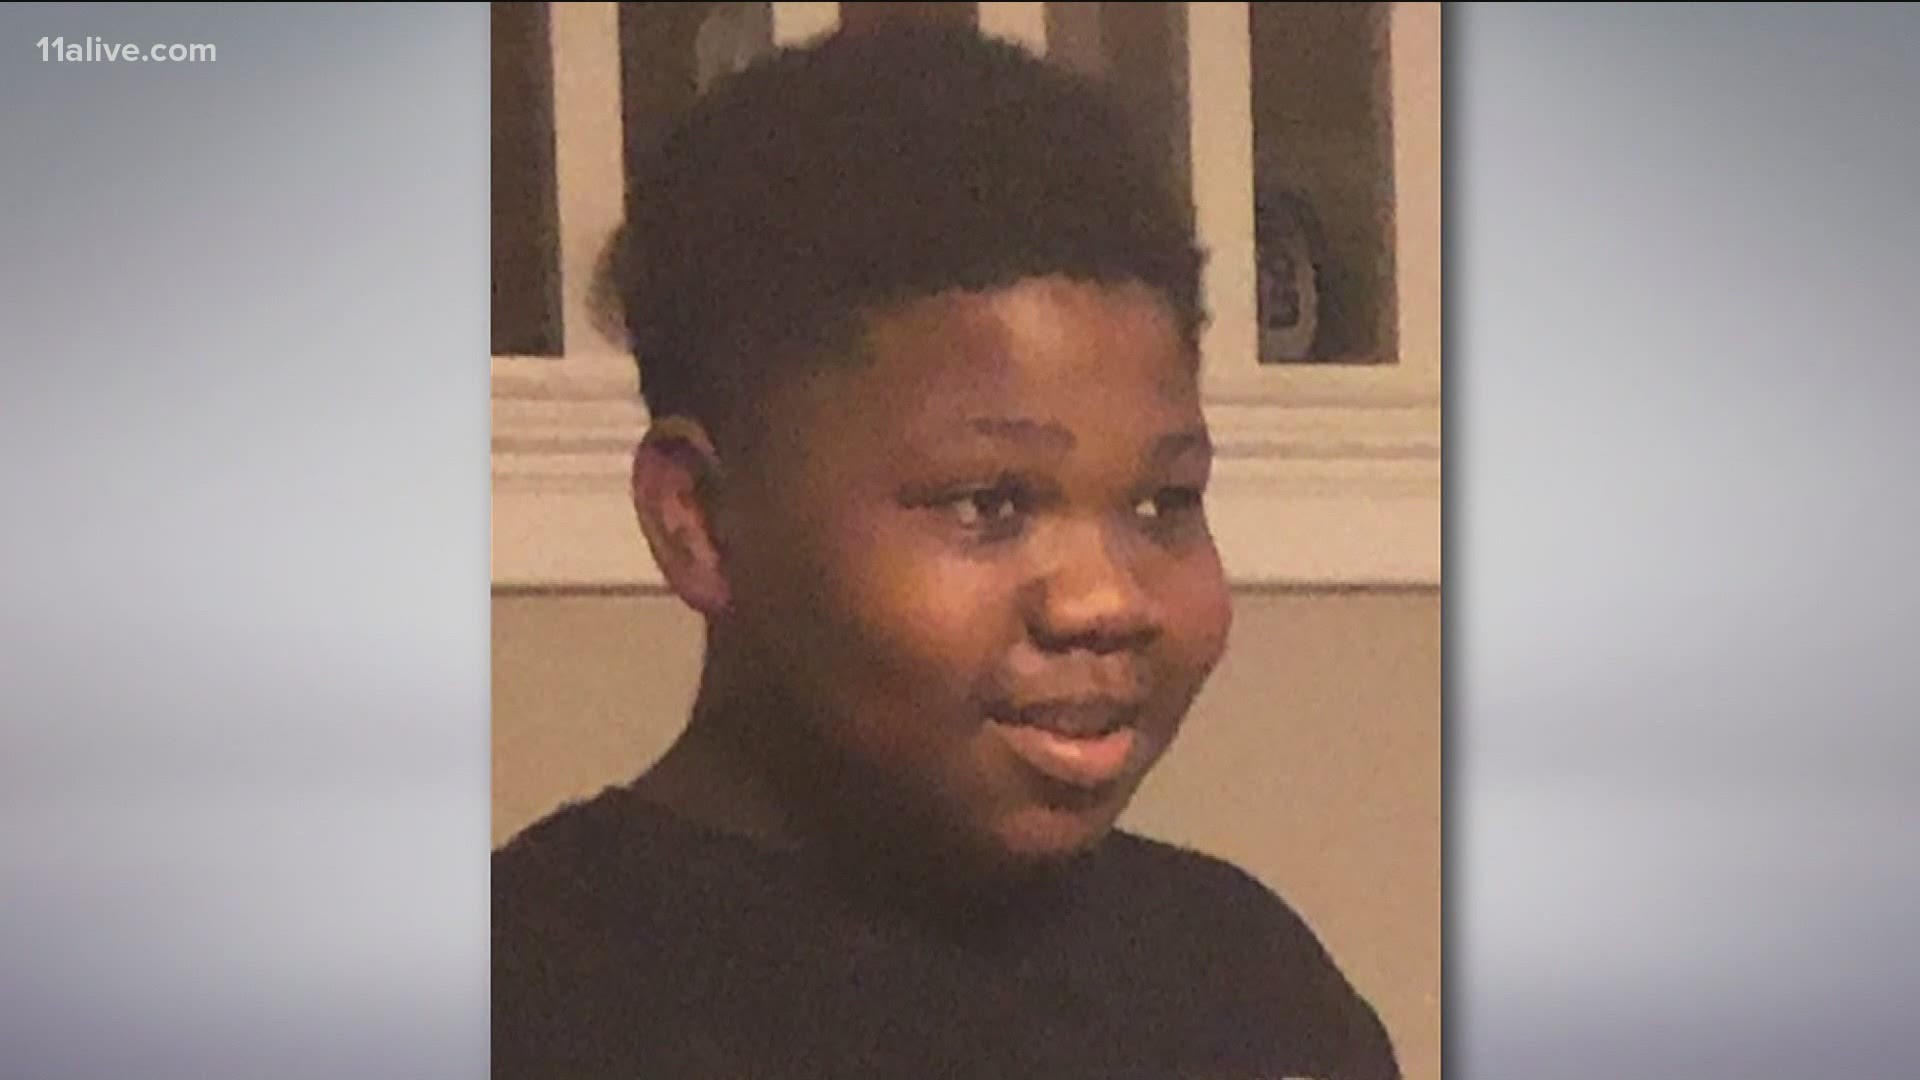 A 12-year-old boy who was found shot to death in the woods in southwest Atlanta yesterday was identified this morning by the Fulton County Medical Examiner's Office.